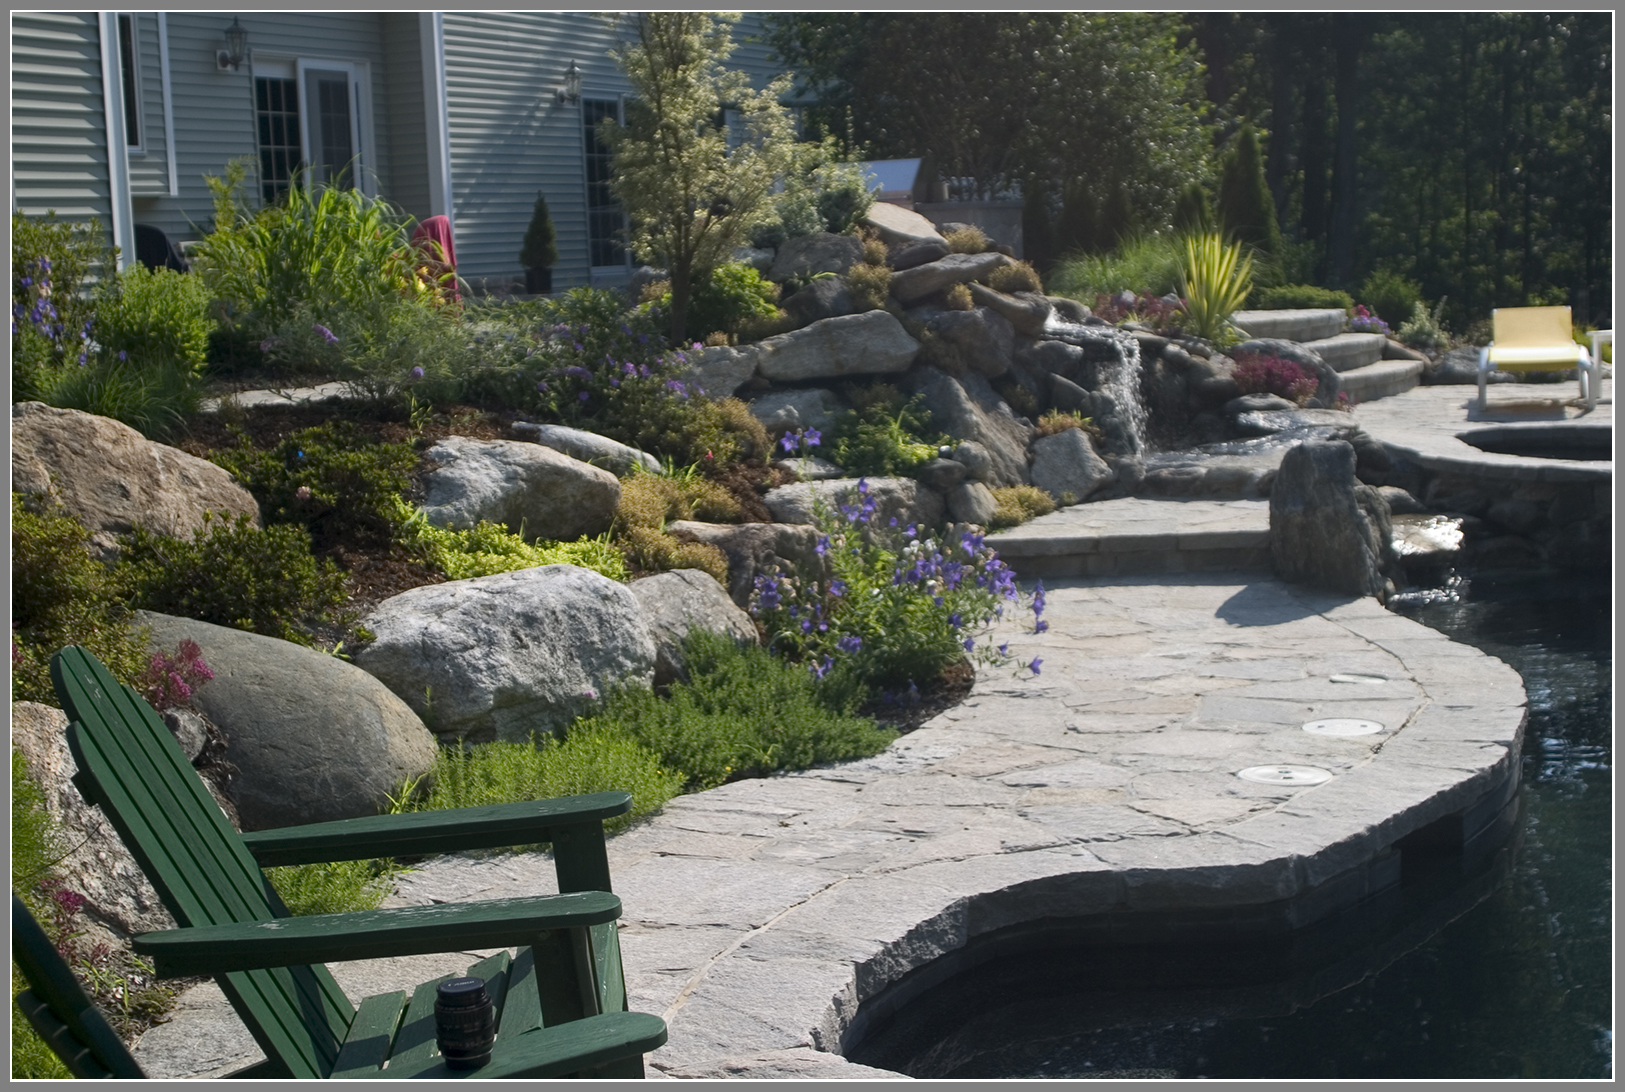 Swimming pool landscape with rock garden and stone decking